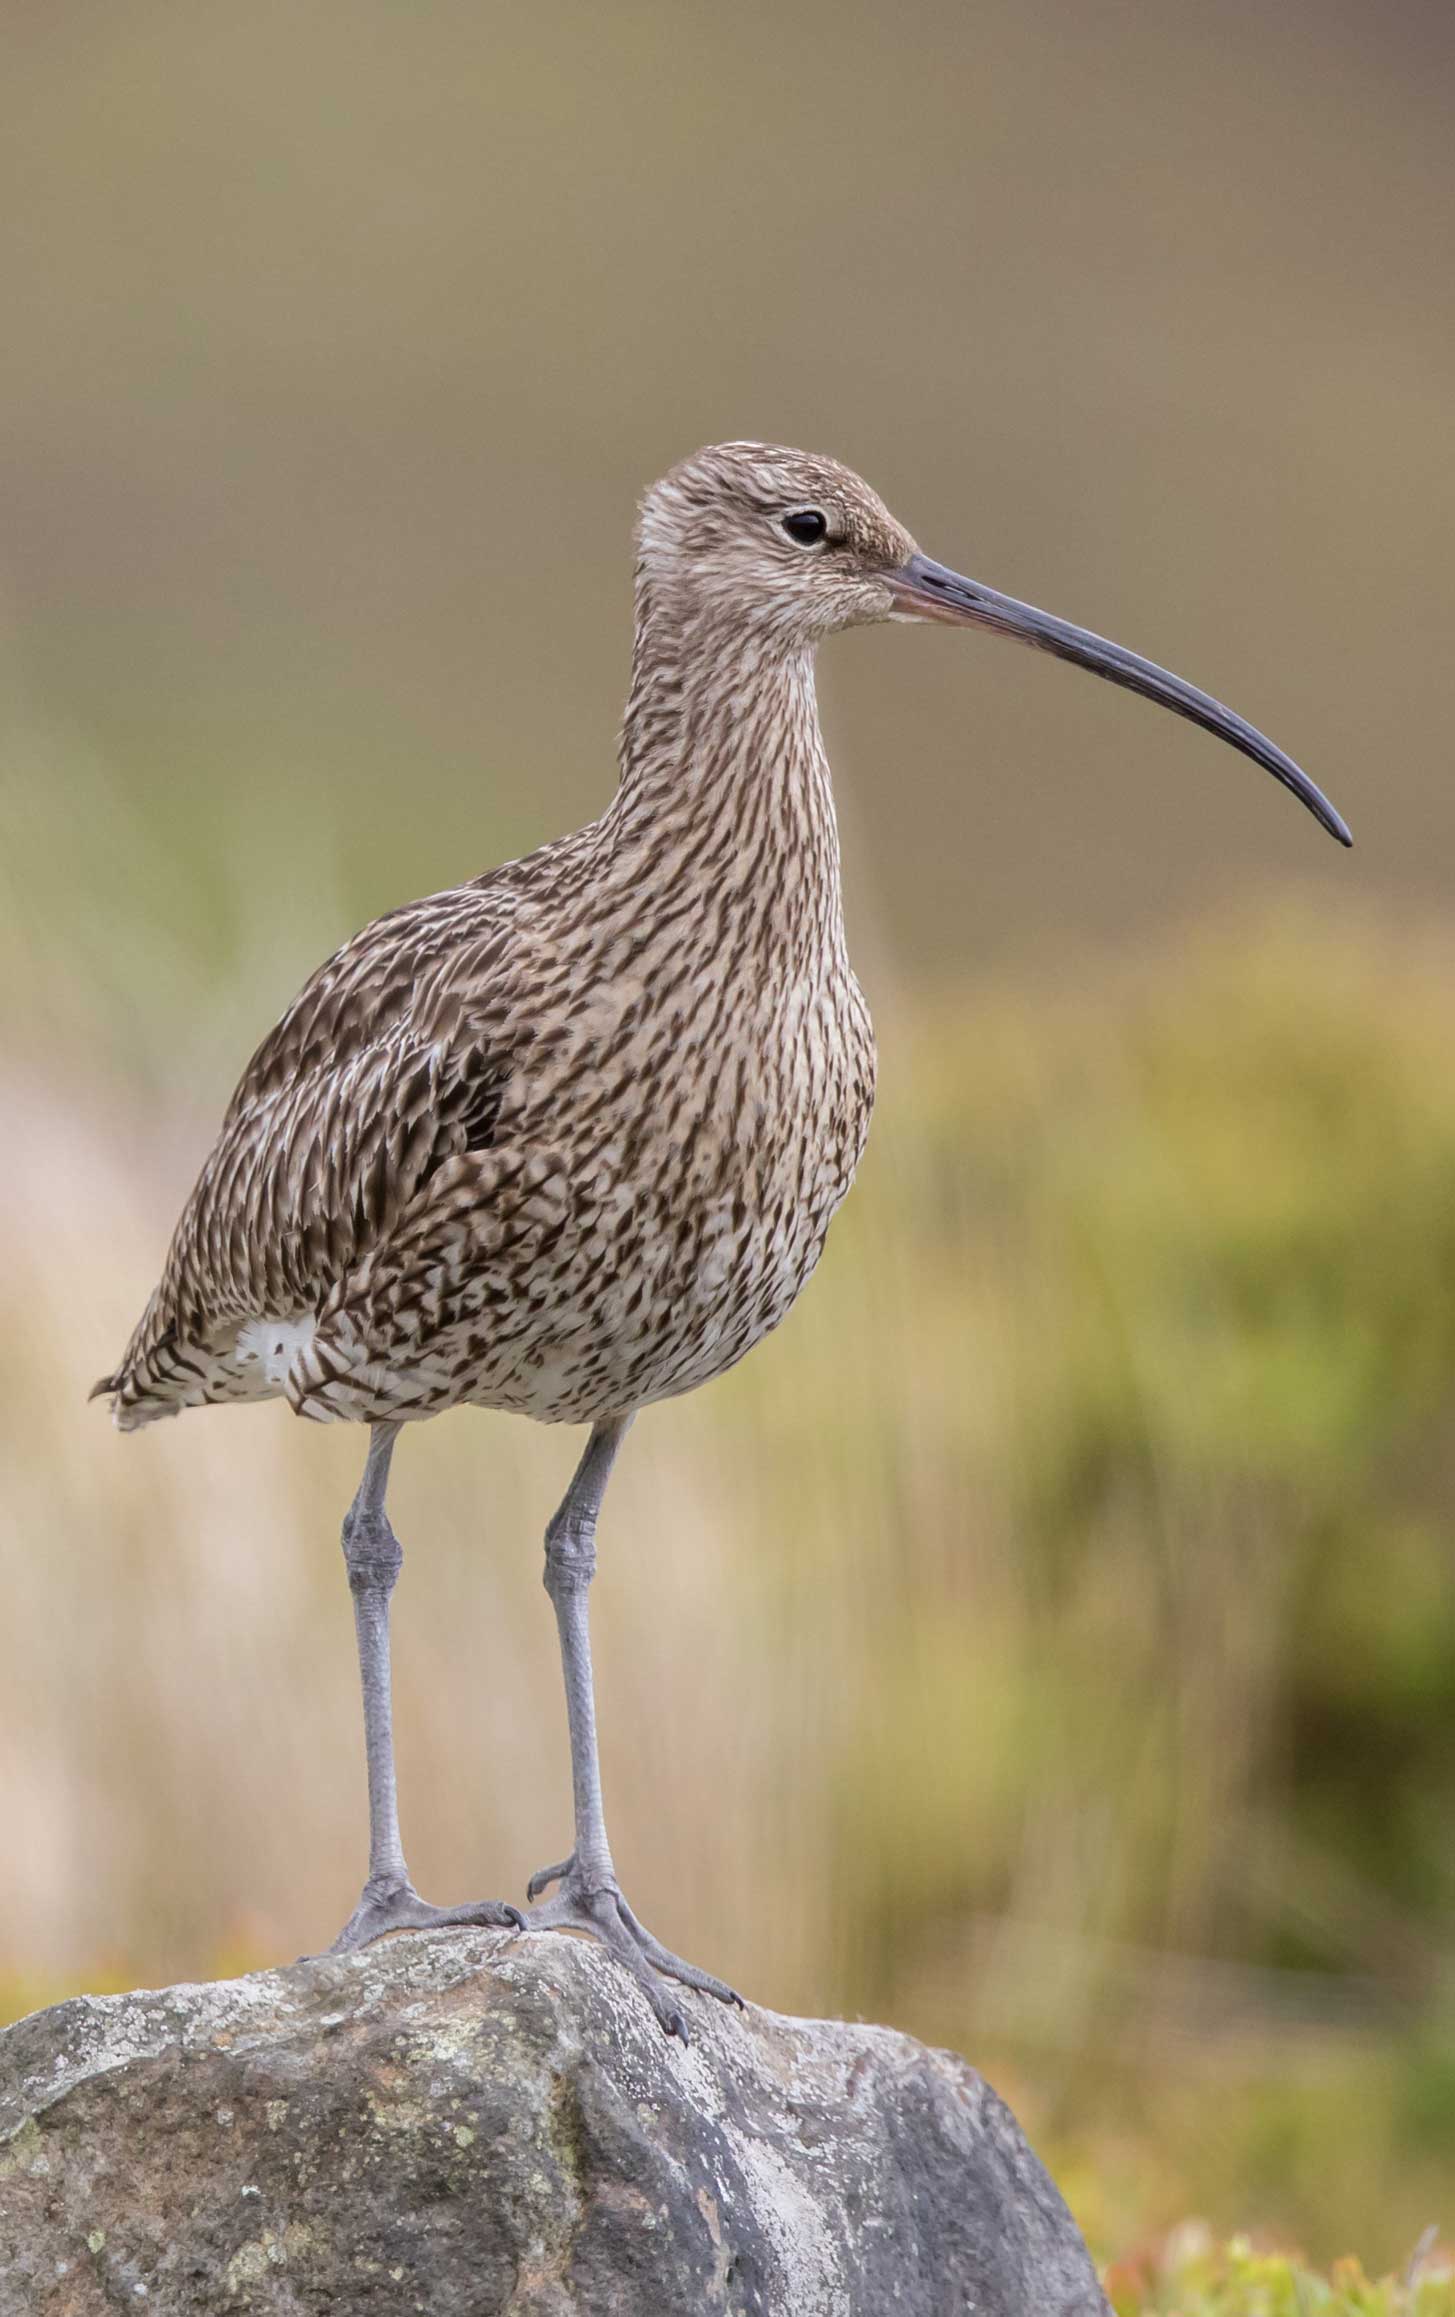 Curlew standing on the rock among moorland. Credit Paul Harris.